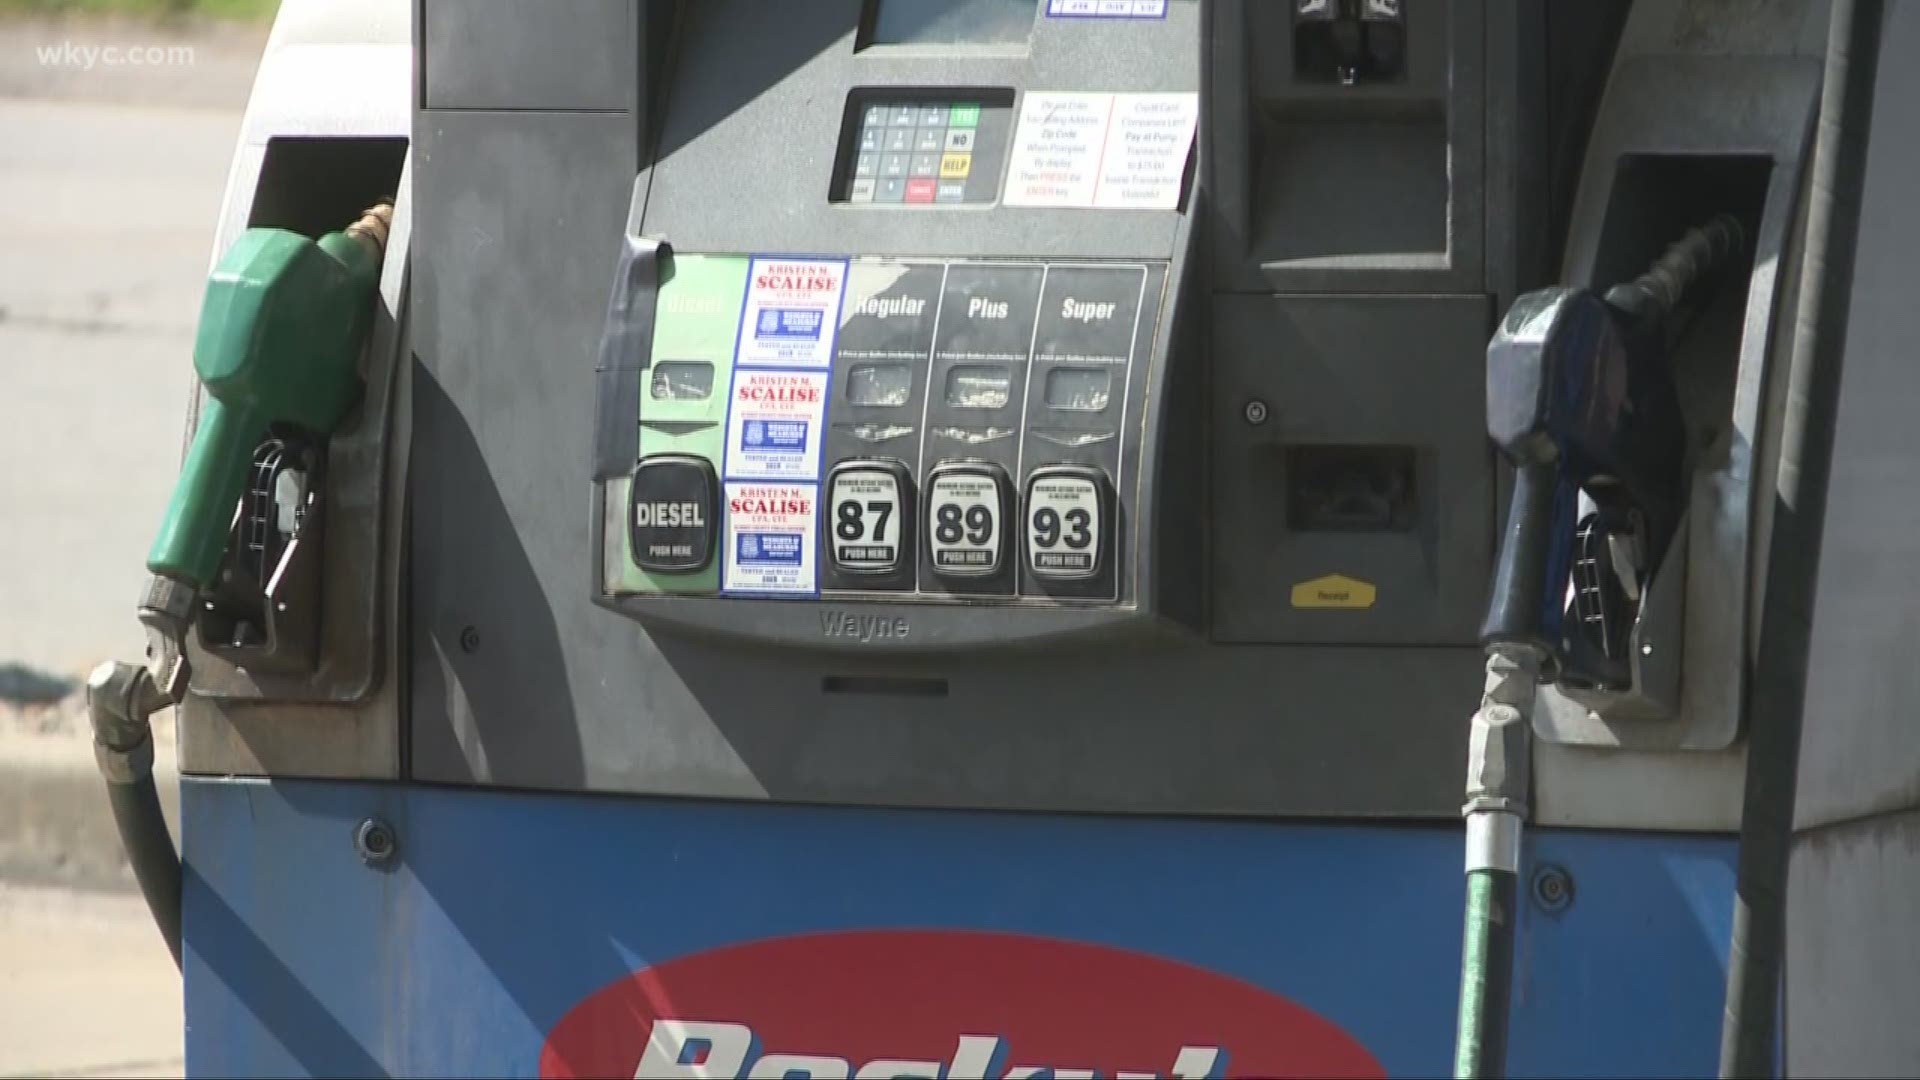 Starting Monday, drivers will pay 10.5 cents a gallon more for gas and 19 cents a gallon more for diesel fuel.